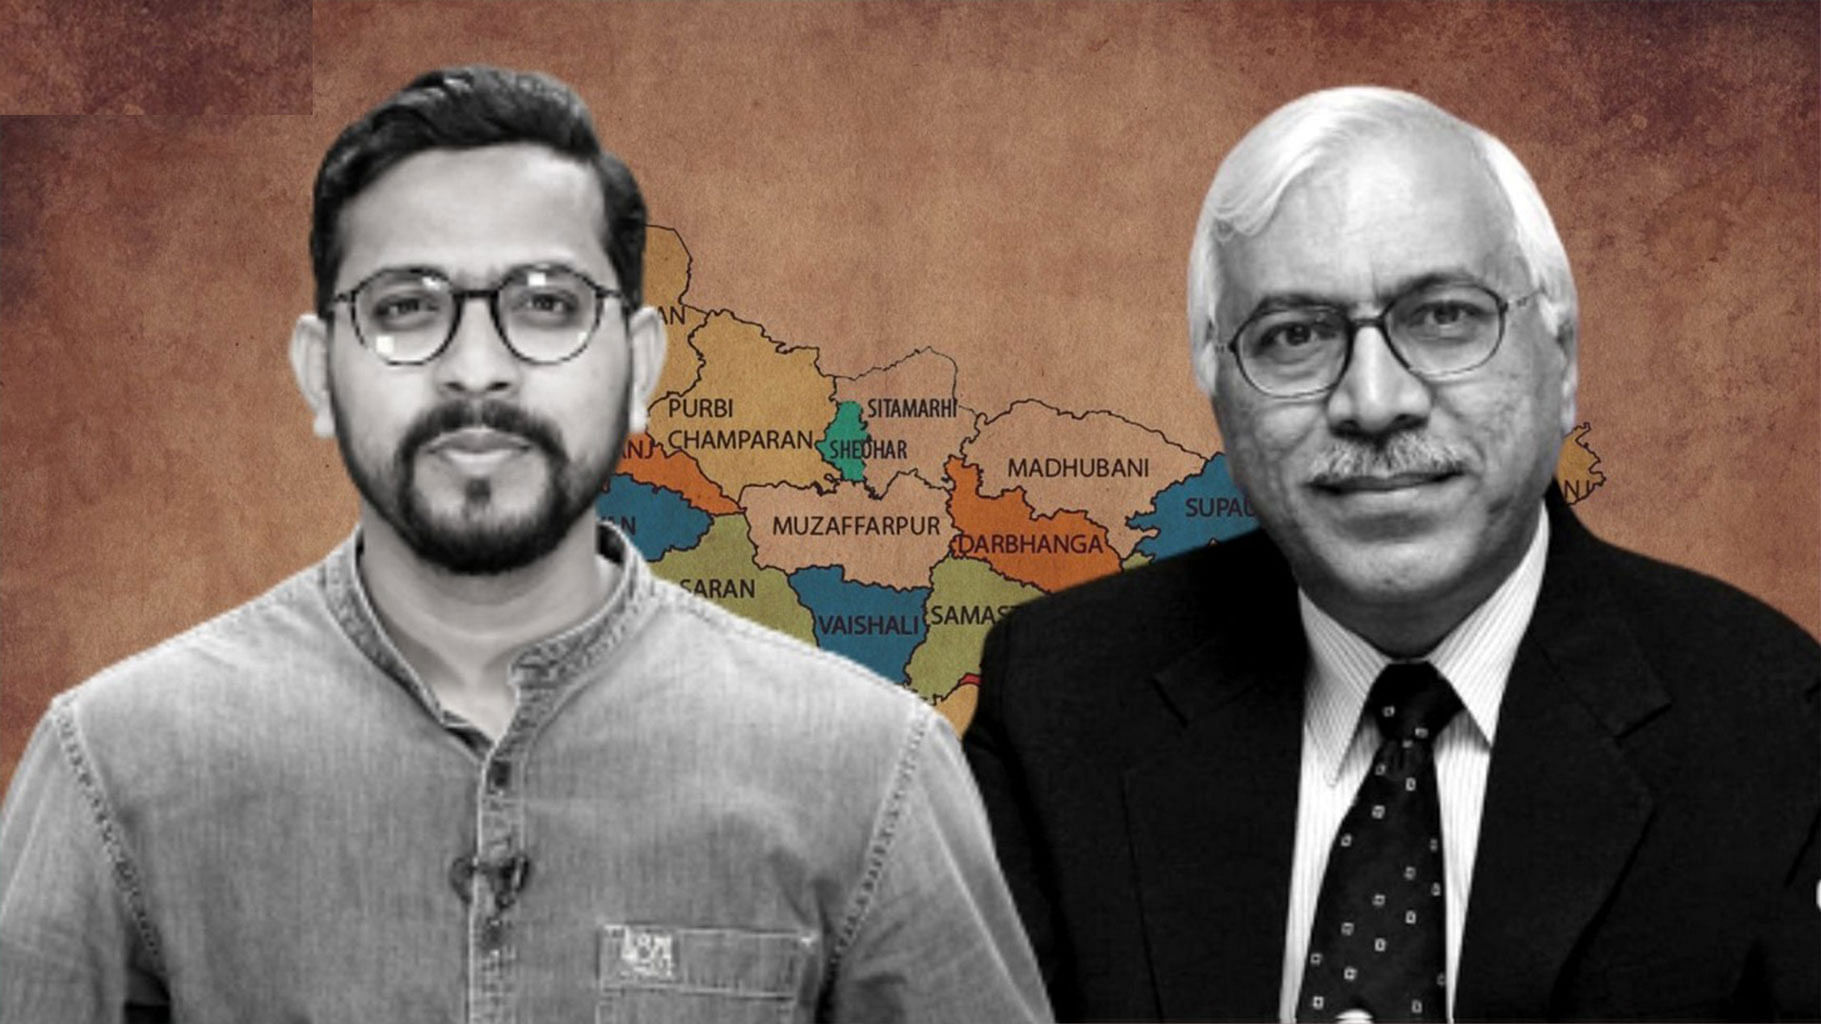 The Quint spoke to SY Quraishi, former Chief Election Commissioner of India